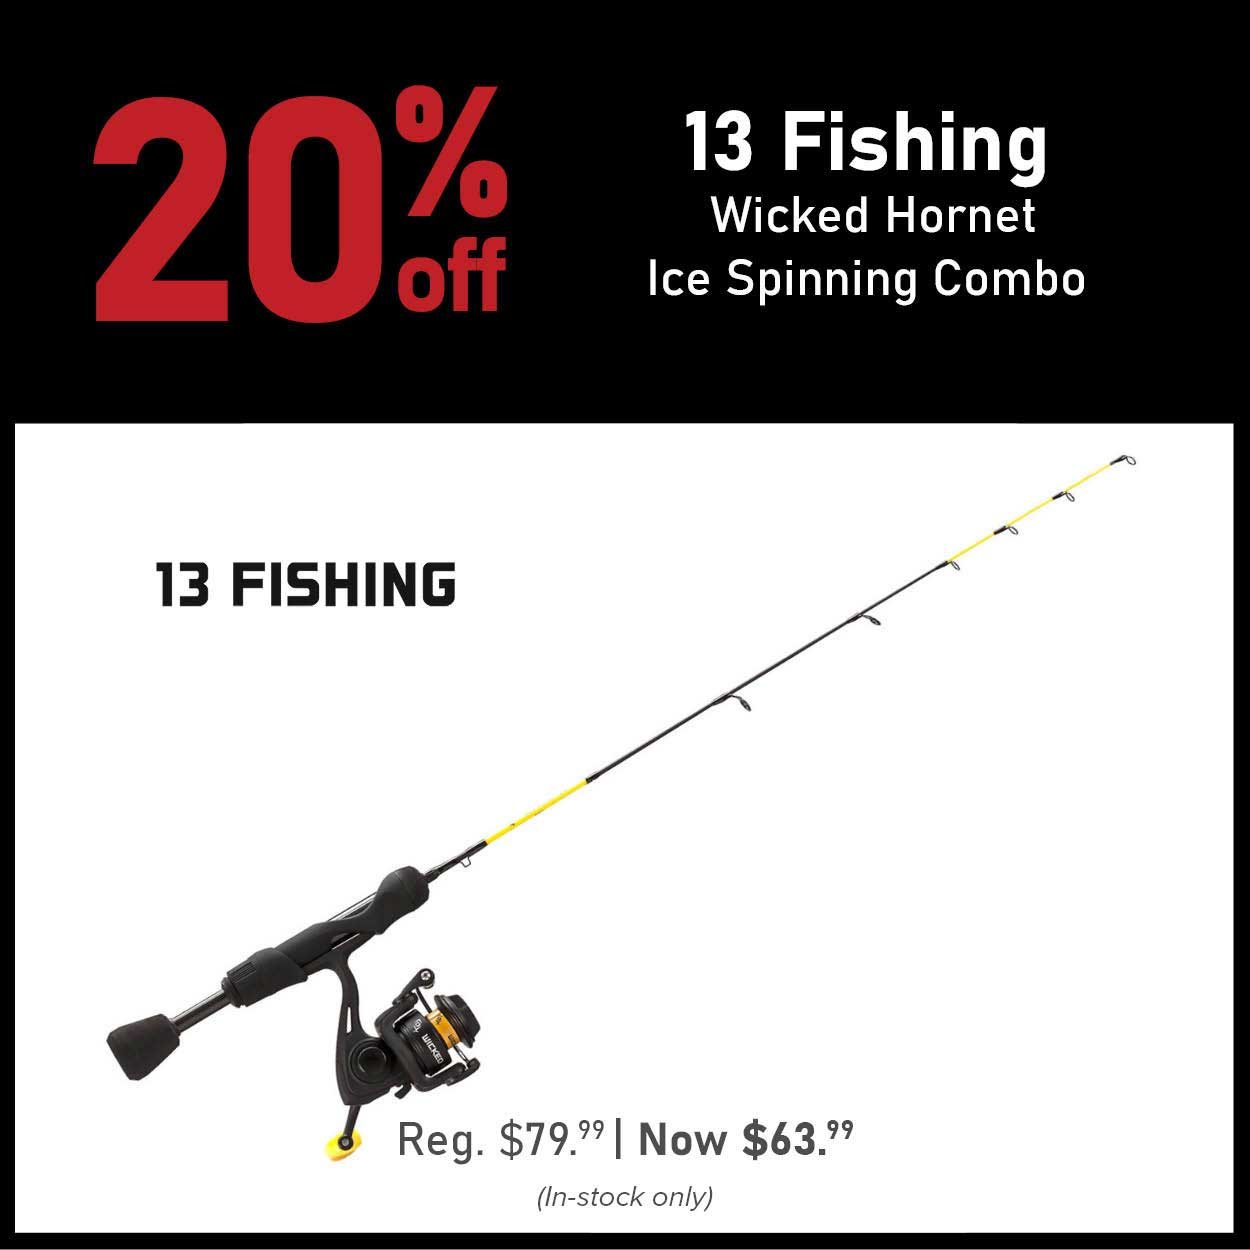 20% Off 13 Fishing Wicked Hornet Ice Spinning Combo New! Reg. $79.99 | Now $63.99 (In-stock only)